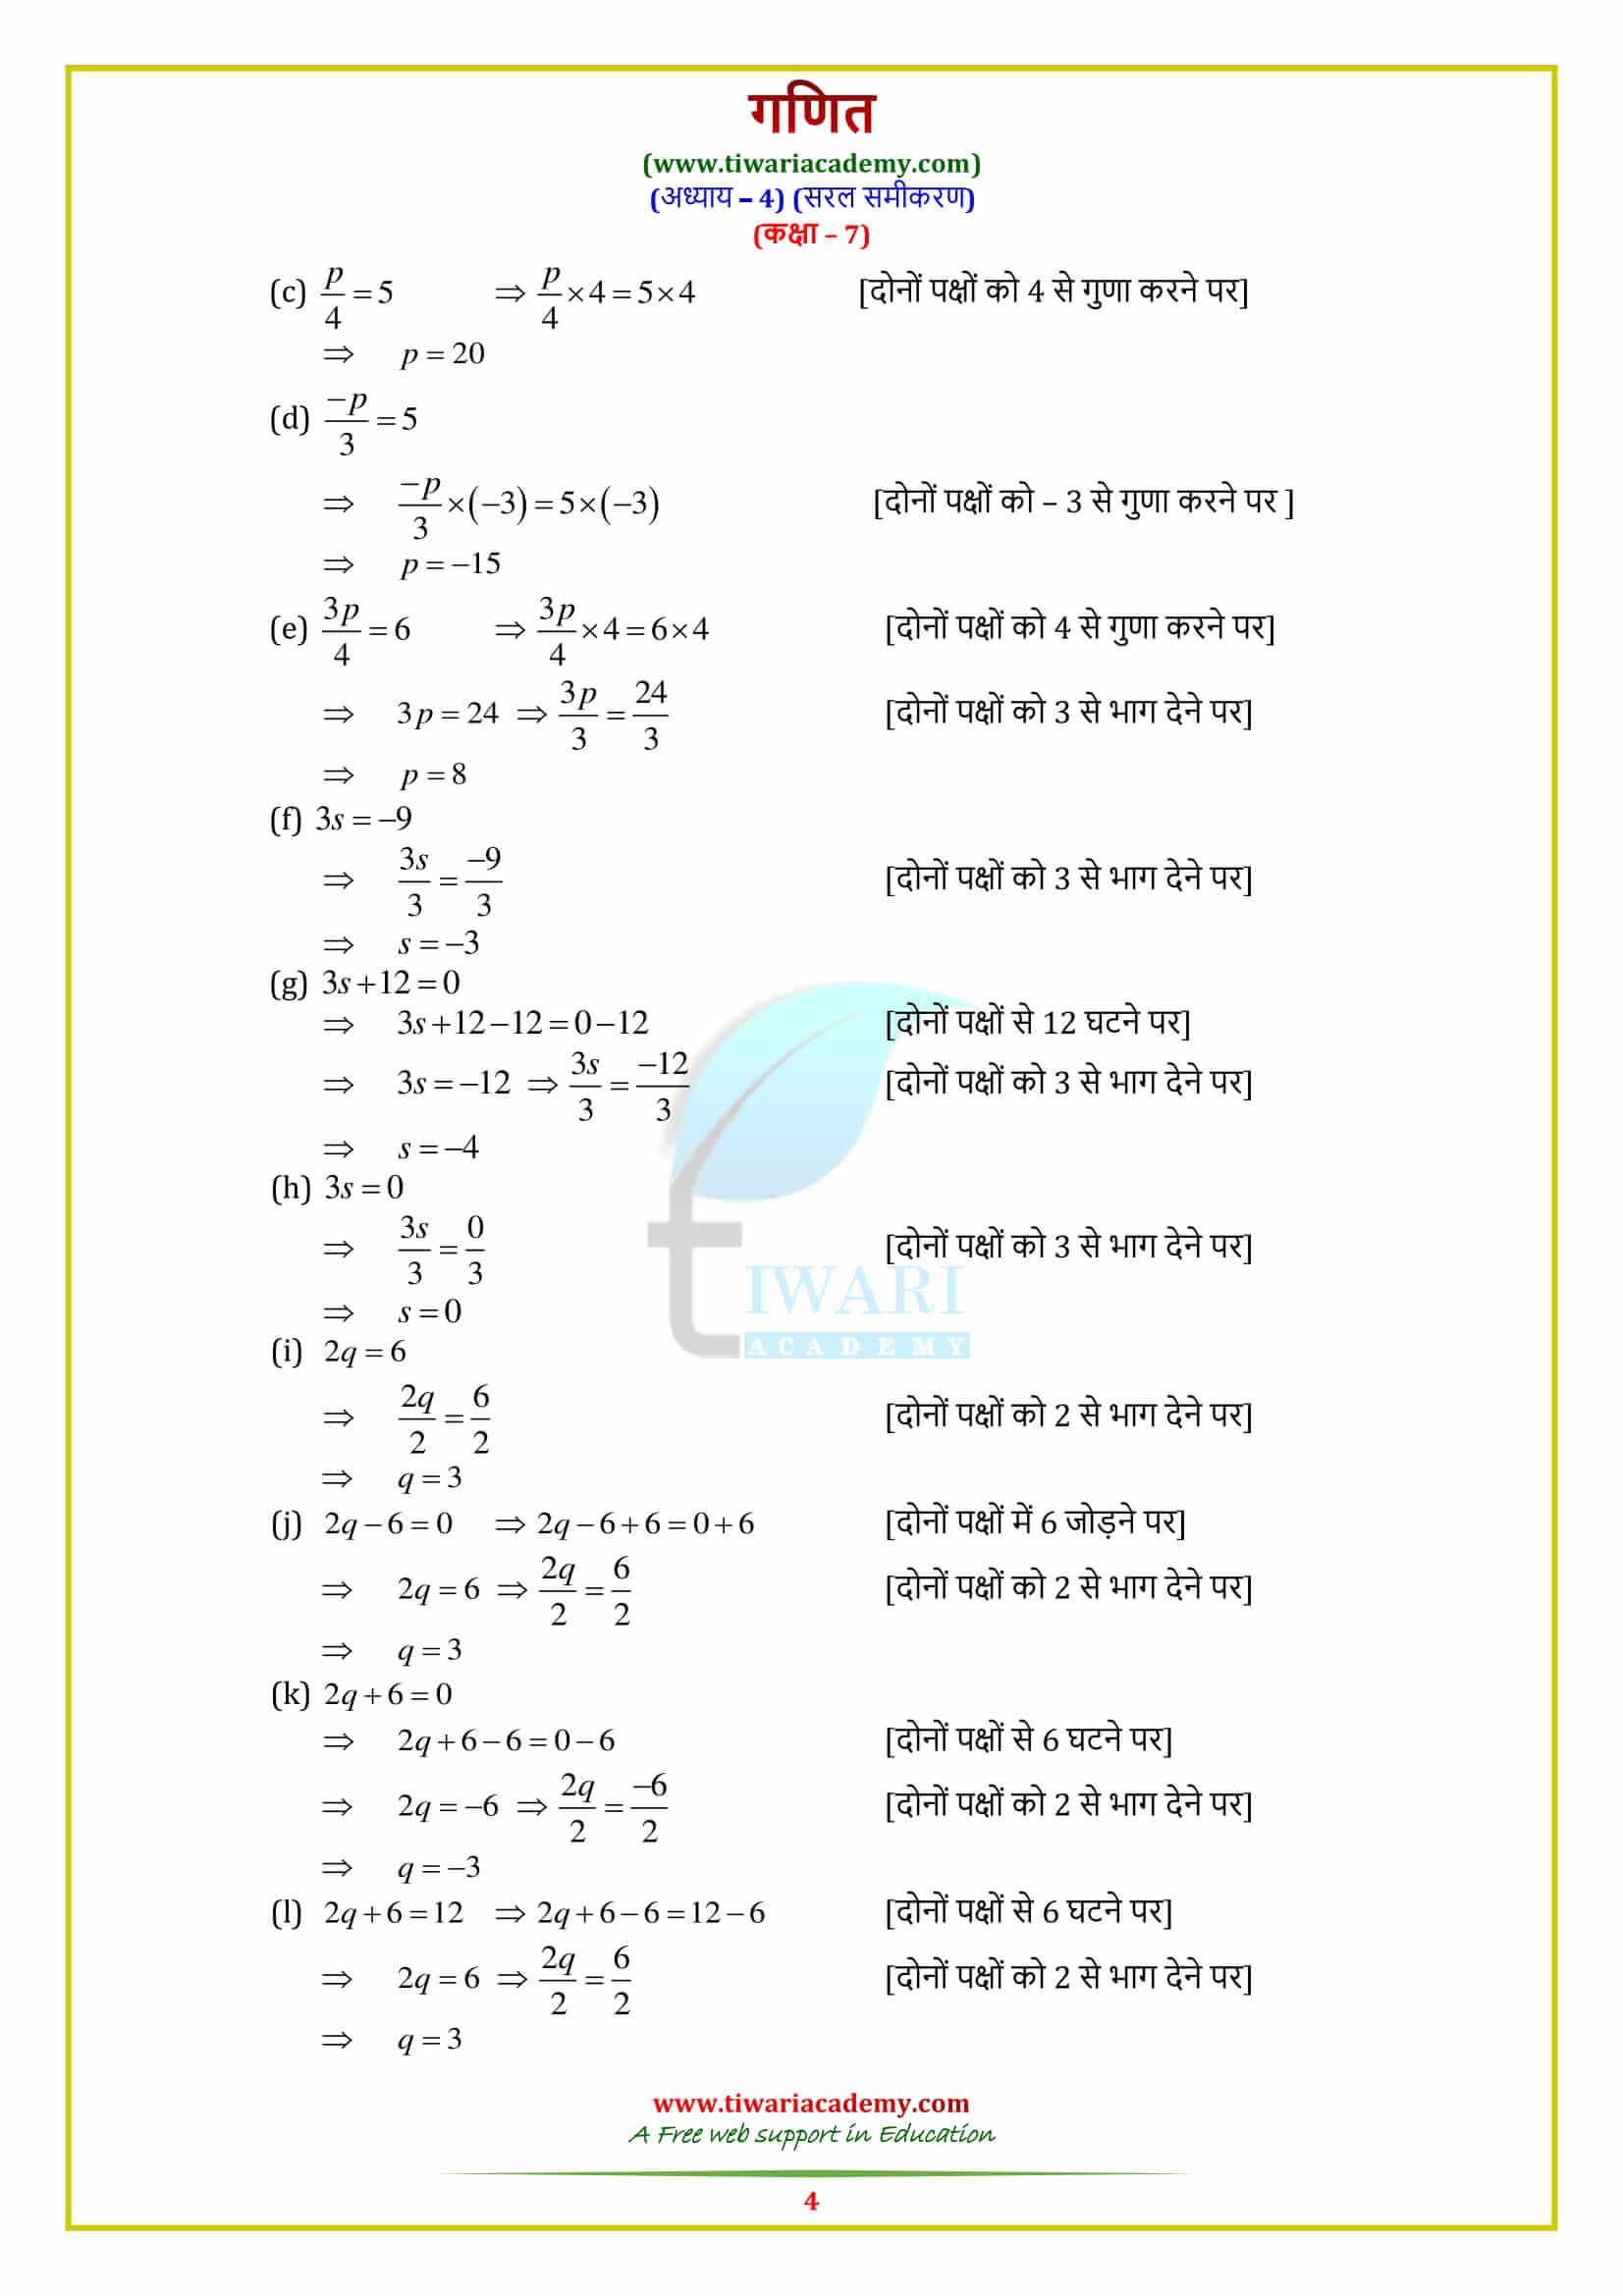 7 Maths Exercise 4.2 Solutions in pdf